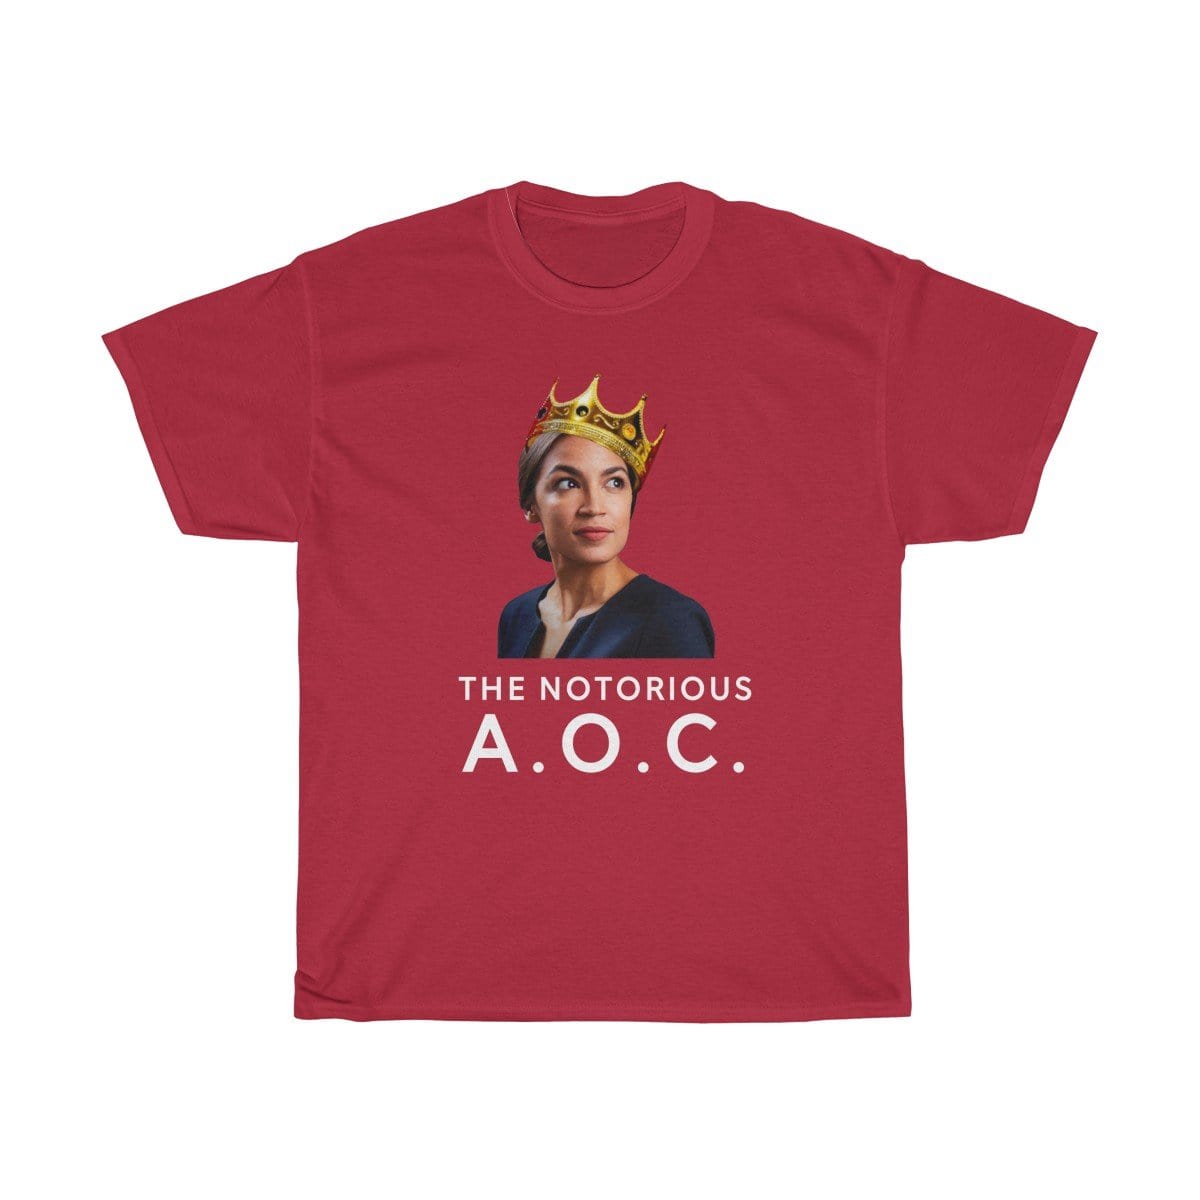 "The Notorious A.O.C." Unisex Heavy Cotton Tee - True Blue Gear